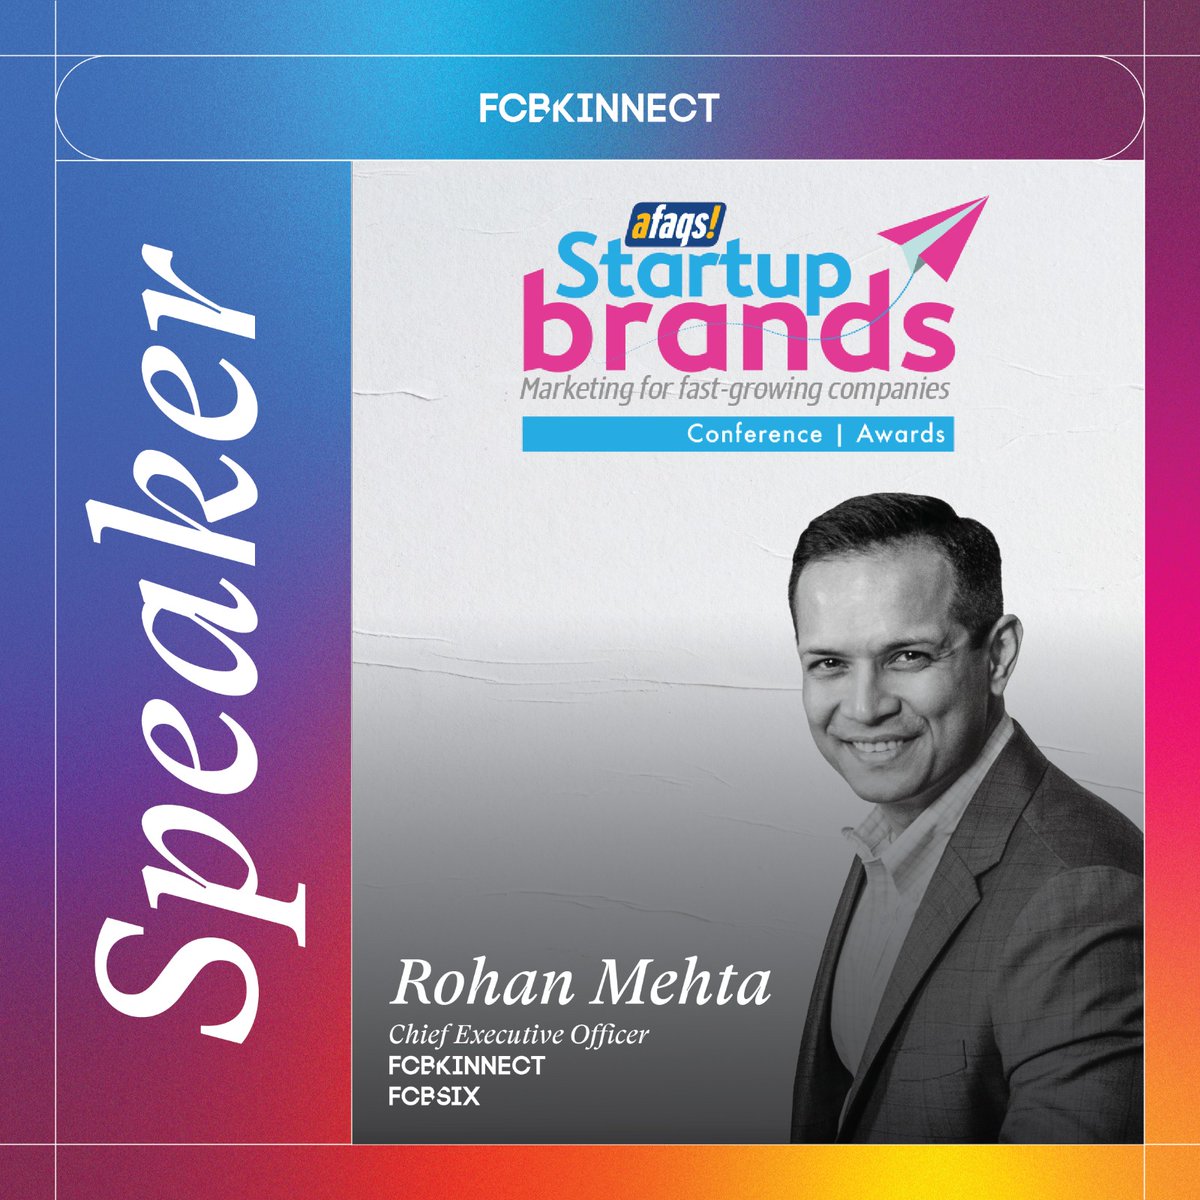 We're thrilled to share that Rohan Mehta, CEO of FCB Kinnect & FCB Six India, will be a distinguished speaker in the 'Branding vs Performance Marketing' panel discussion at the upcoming Afaqs Startup Brands Conference & Awards.

@afaqs @FCBKinnect